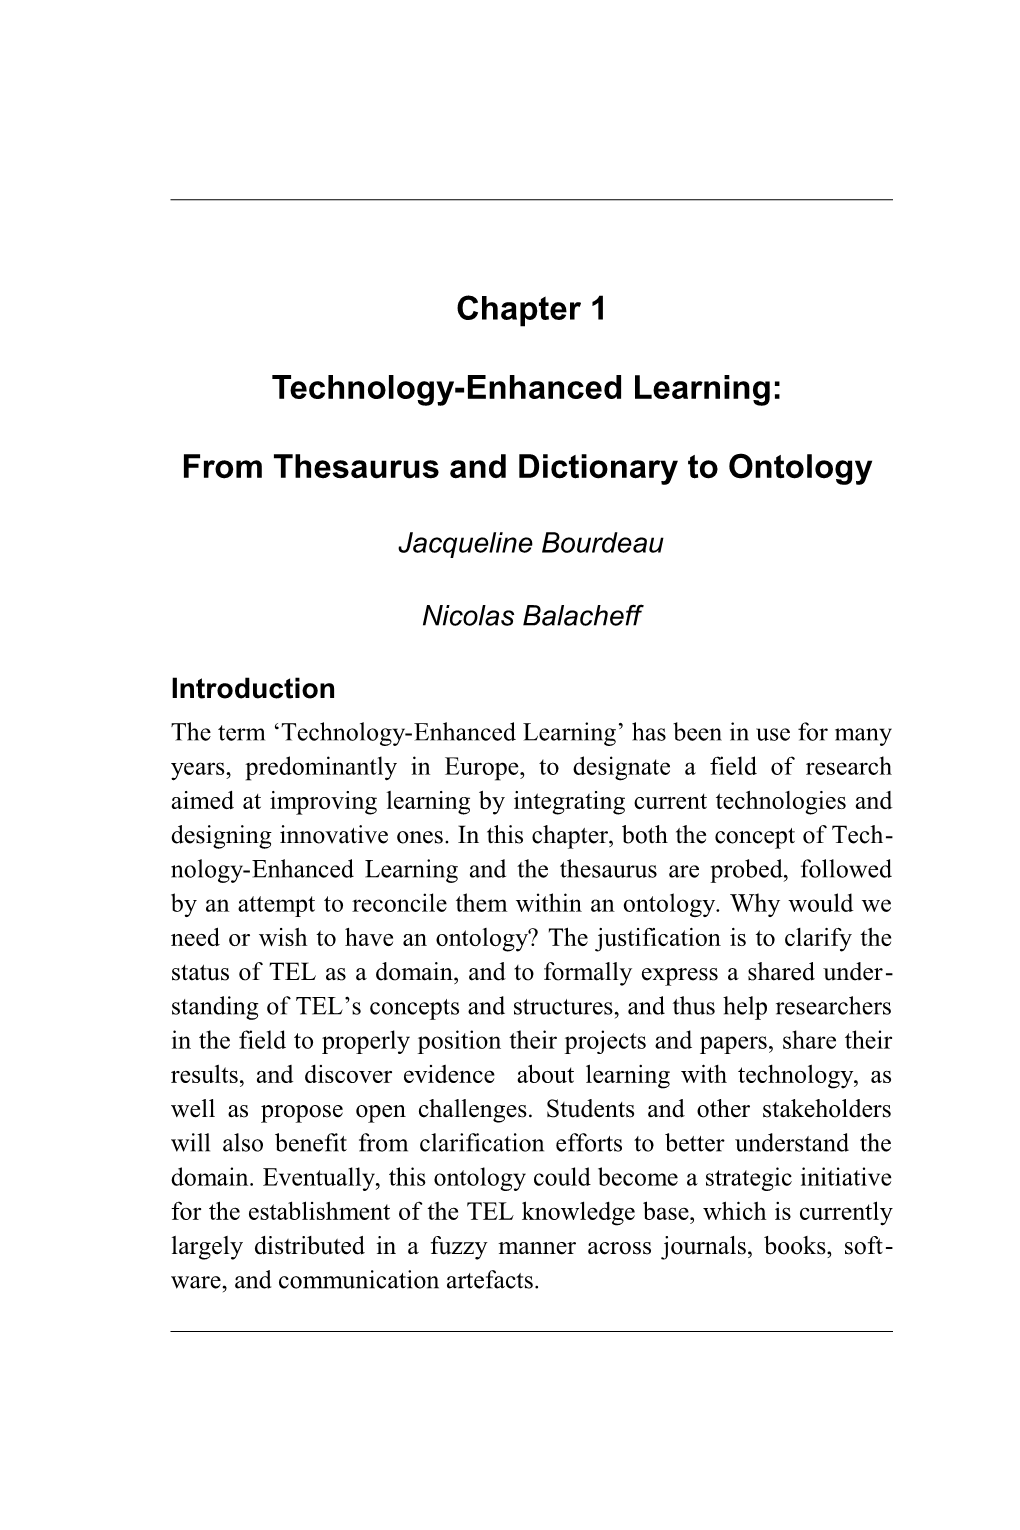 From Thesaurus and Dictionary to Ontology